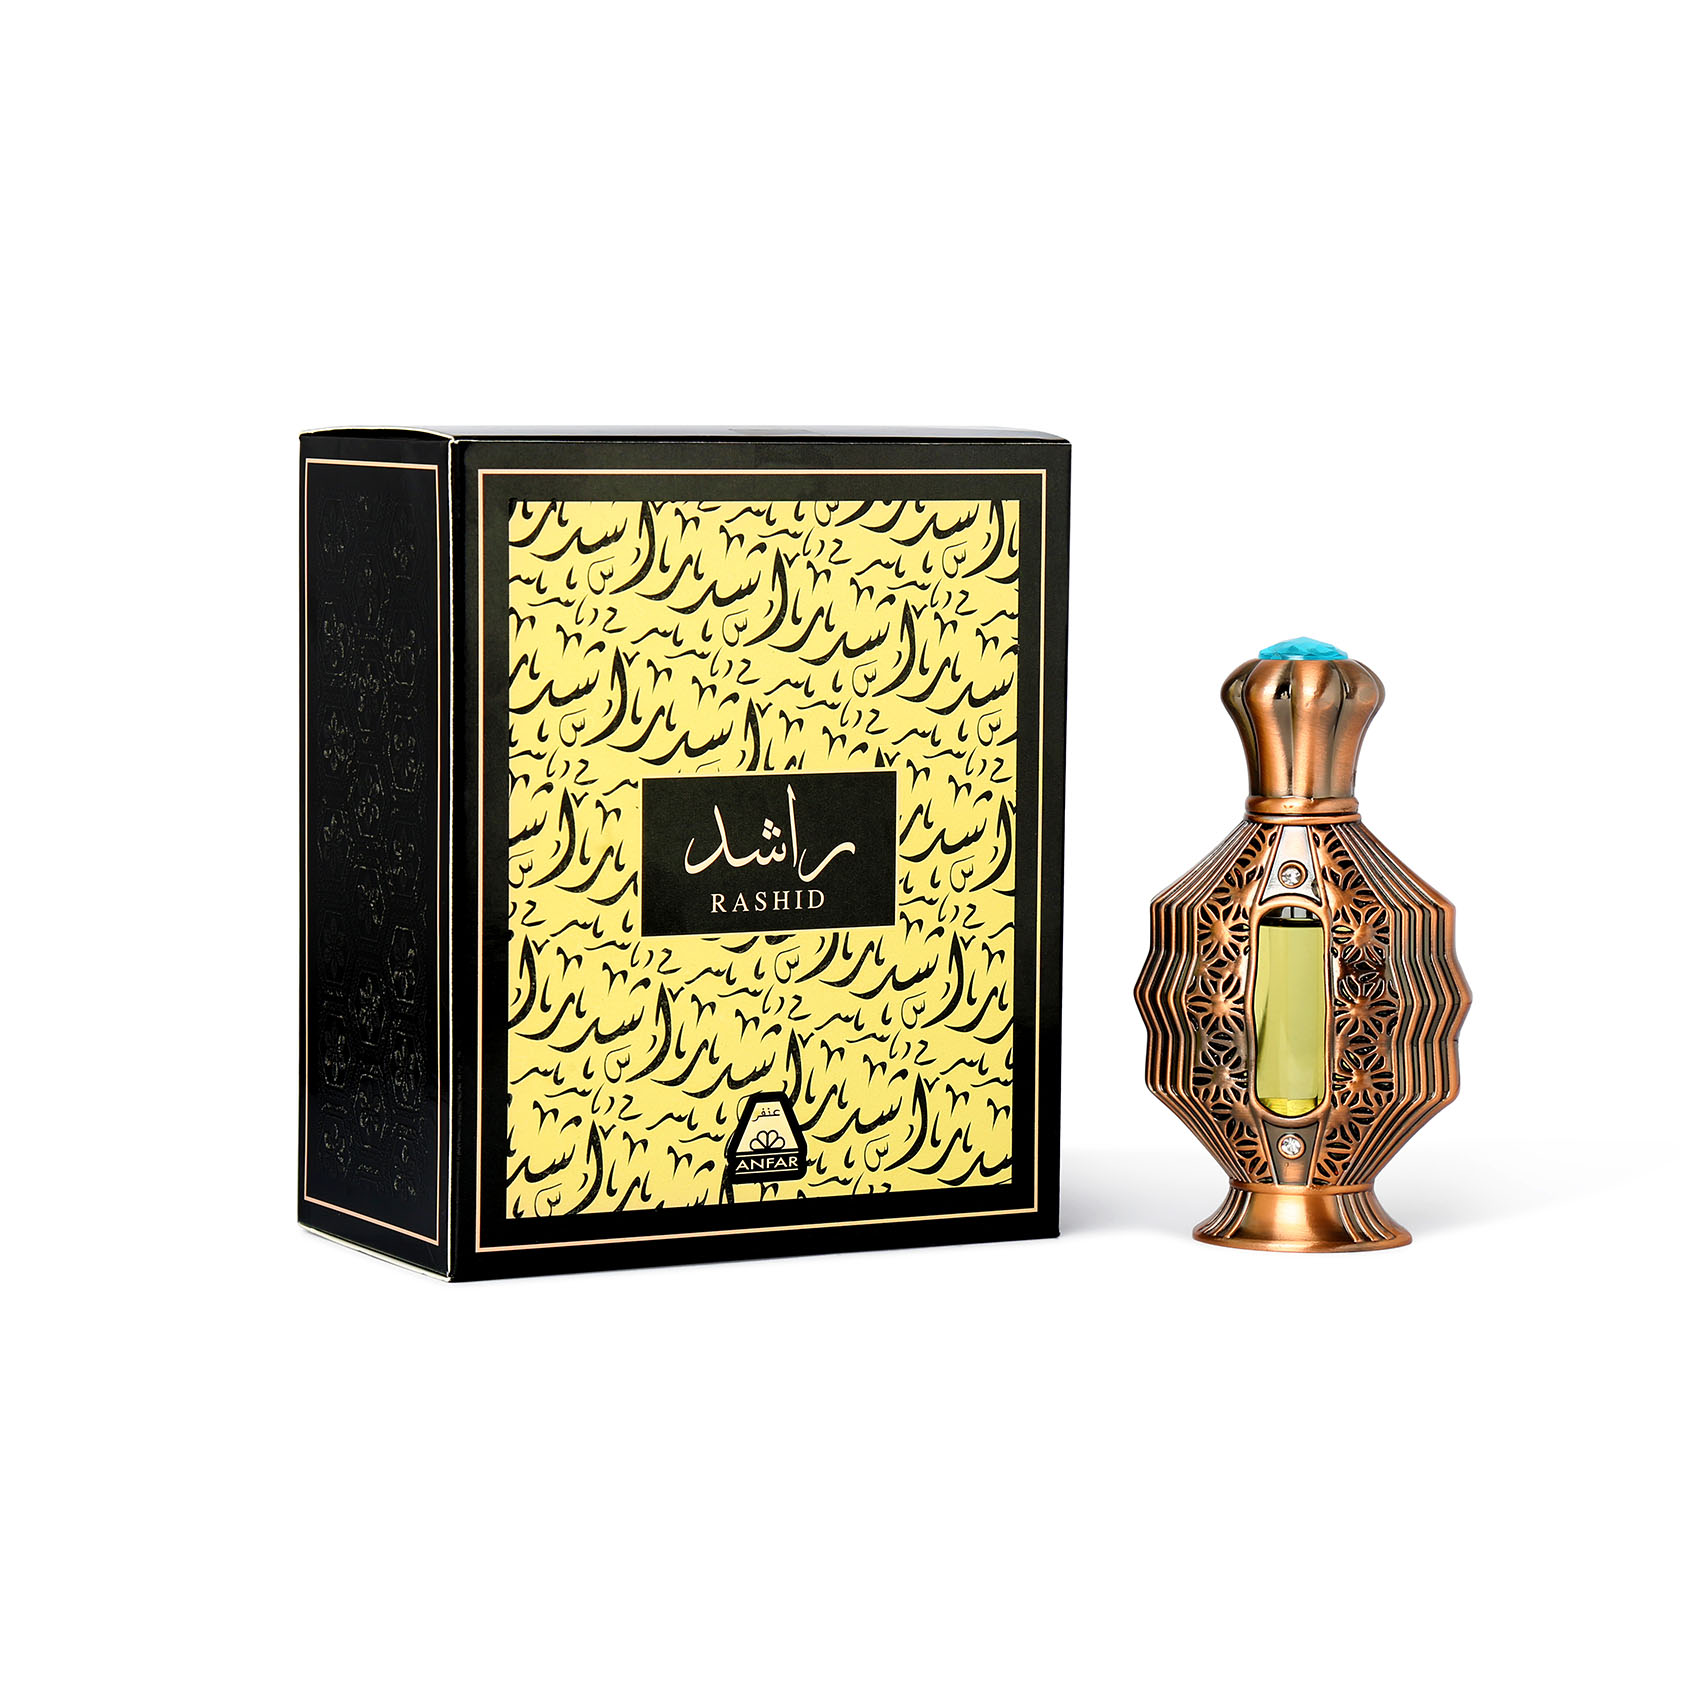 Mukhallat Rashid Concentrated Perfume Free From Alcohol 15ml For Men & Women  By Anfar- Made In Dubai